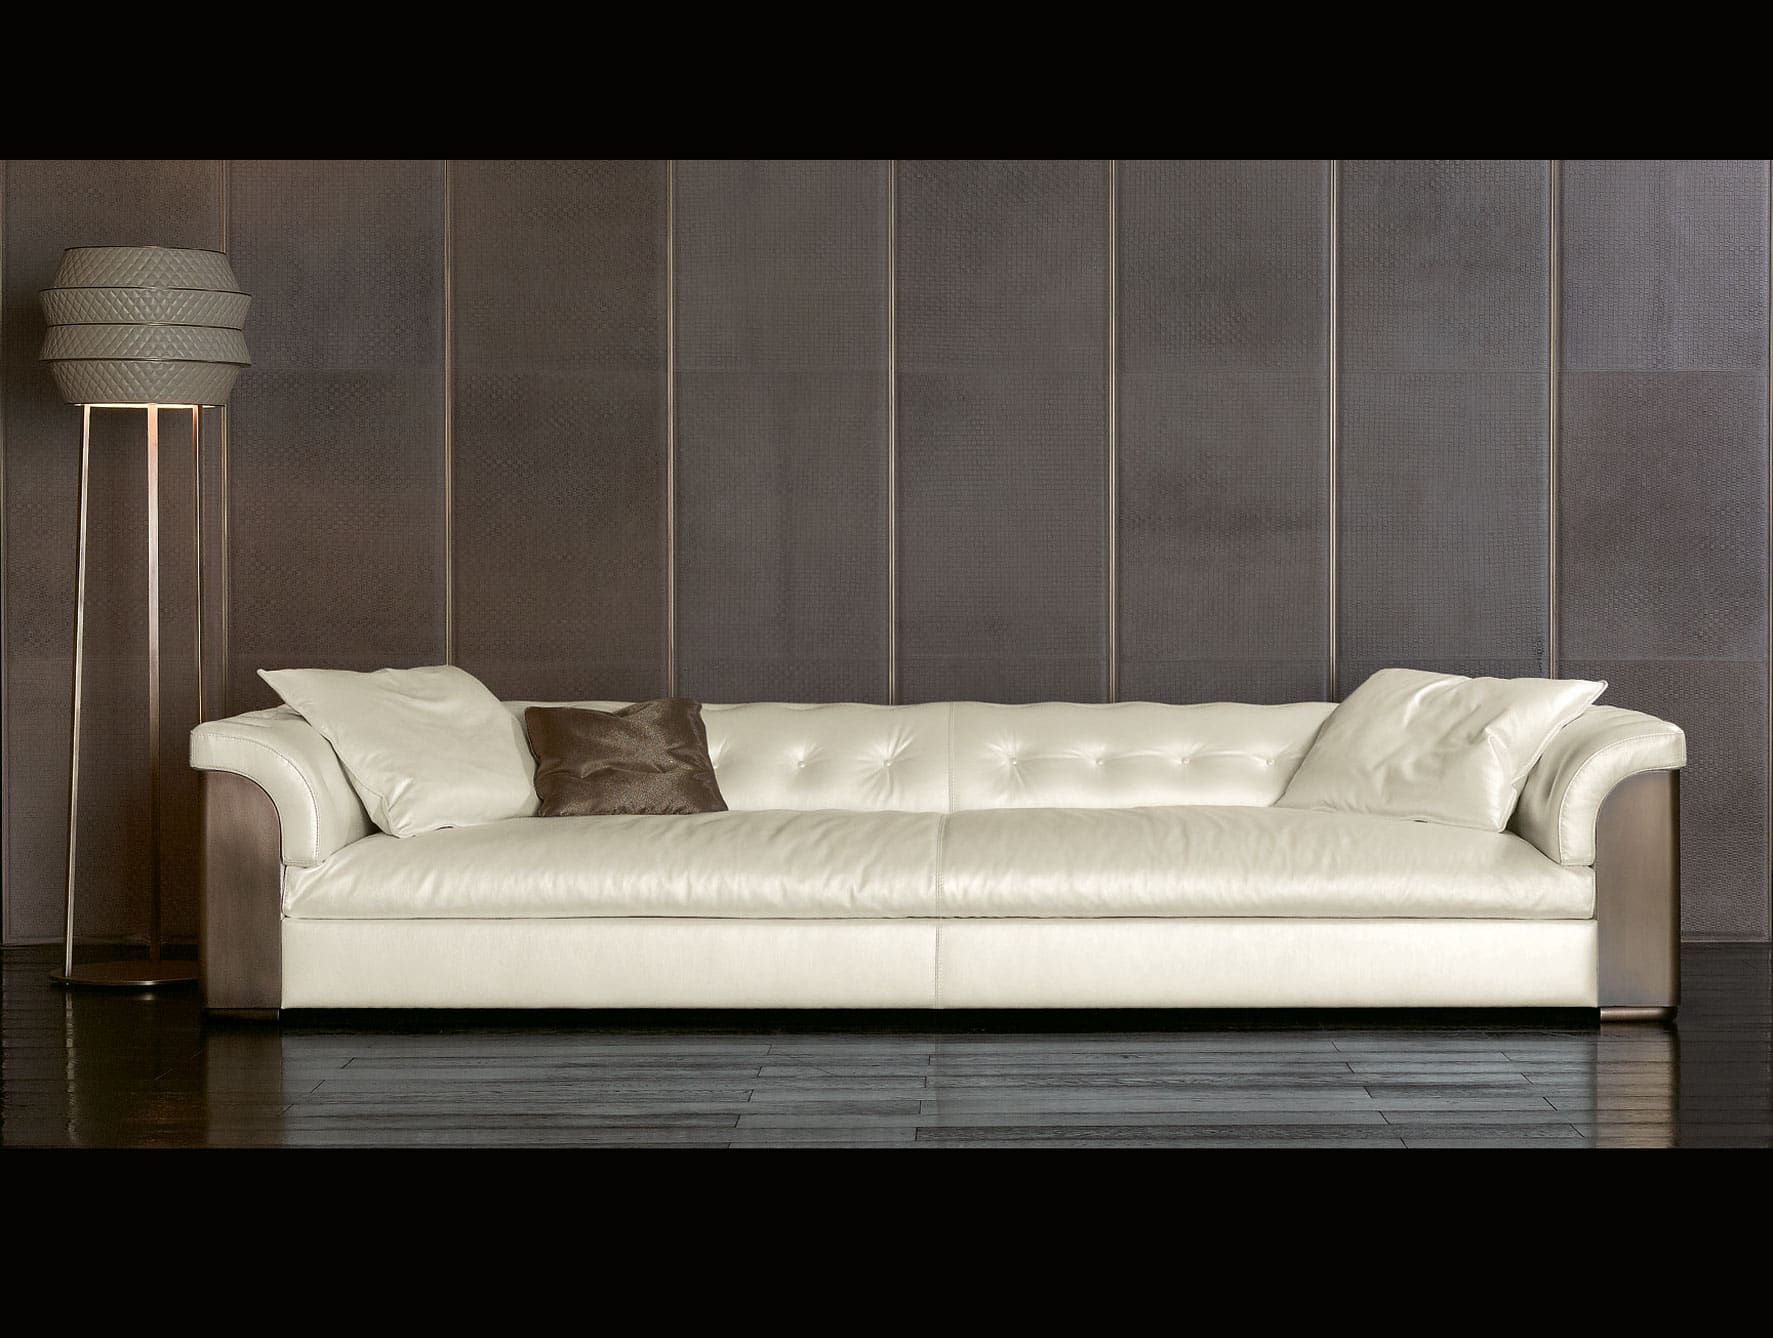 Mytos modern luxury sofa chair with white leather